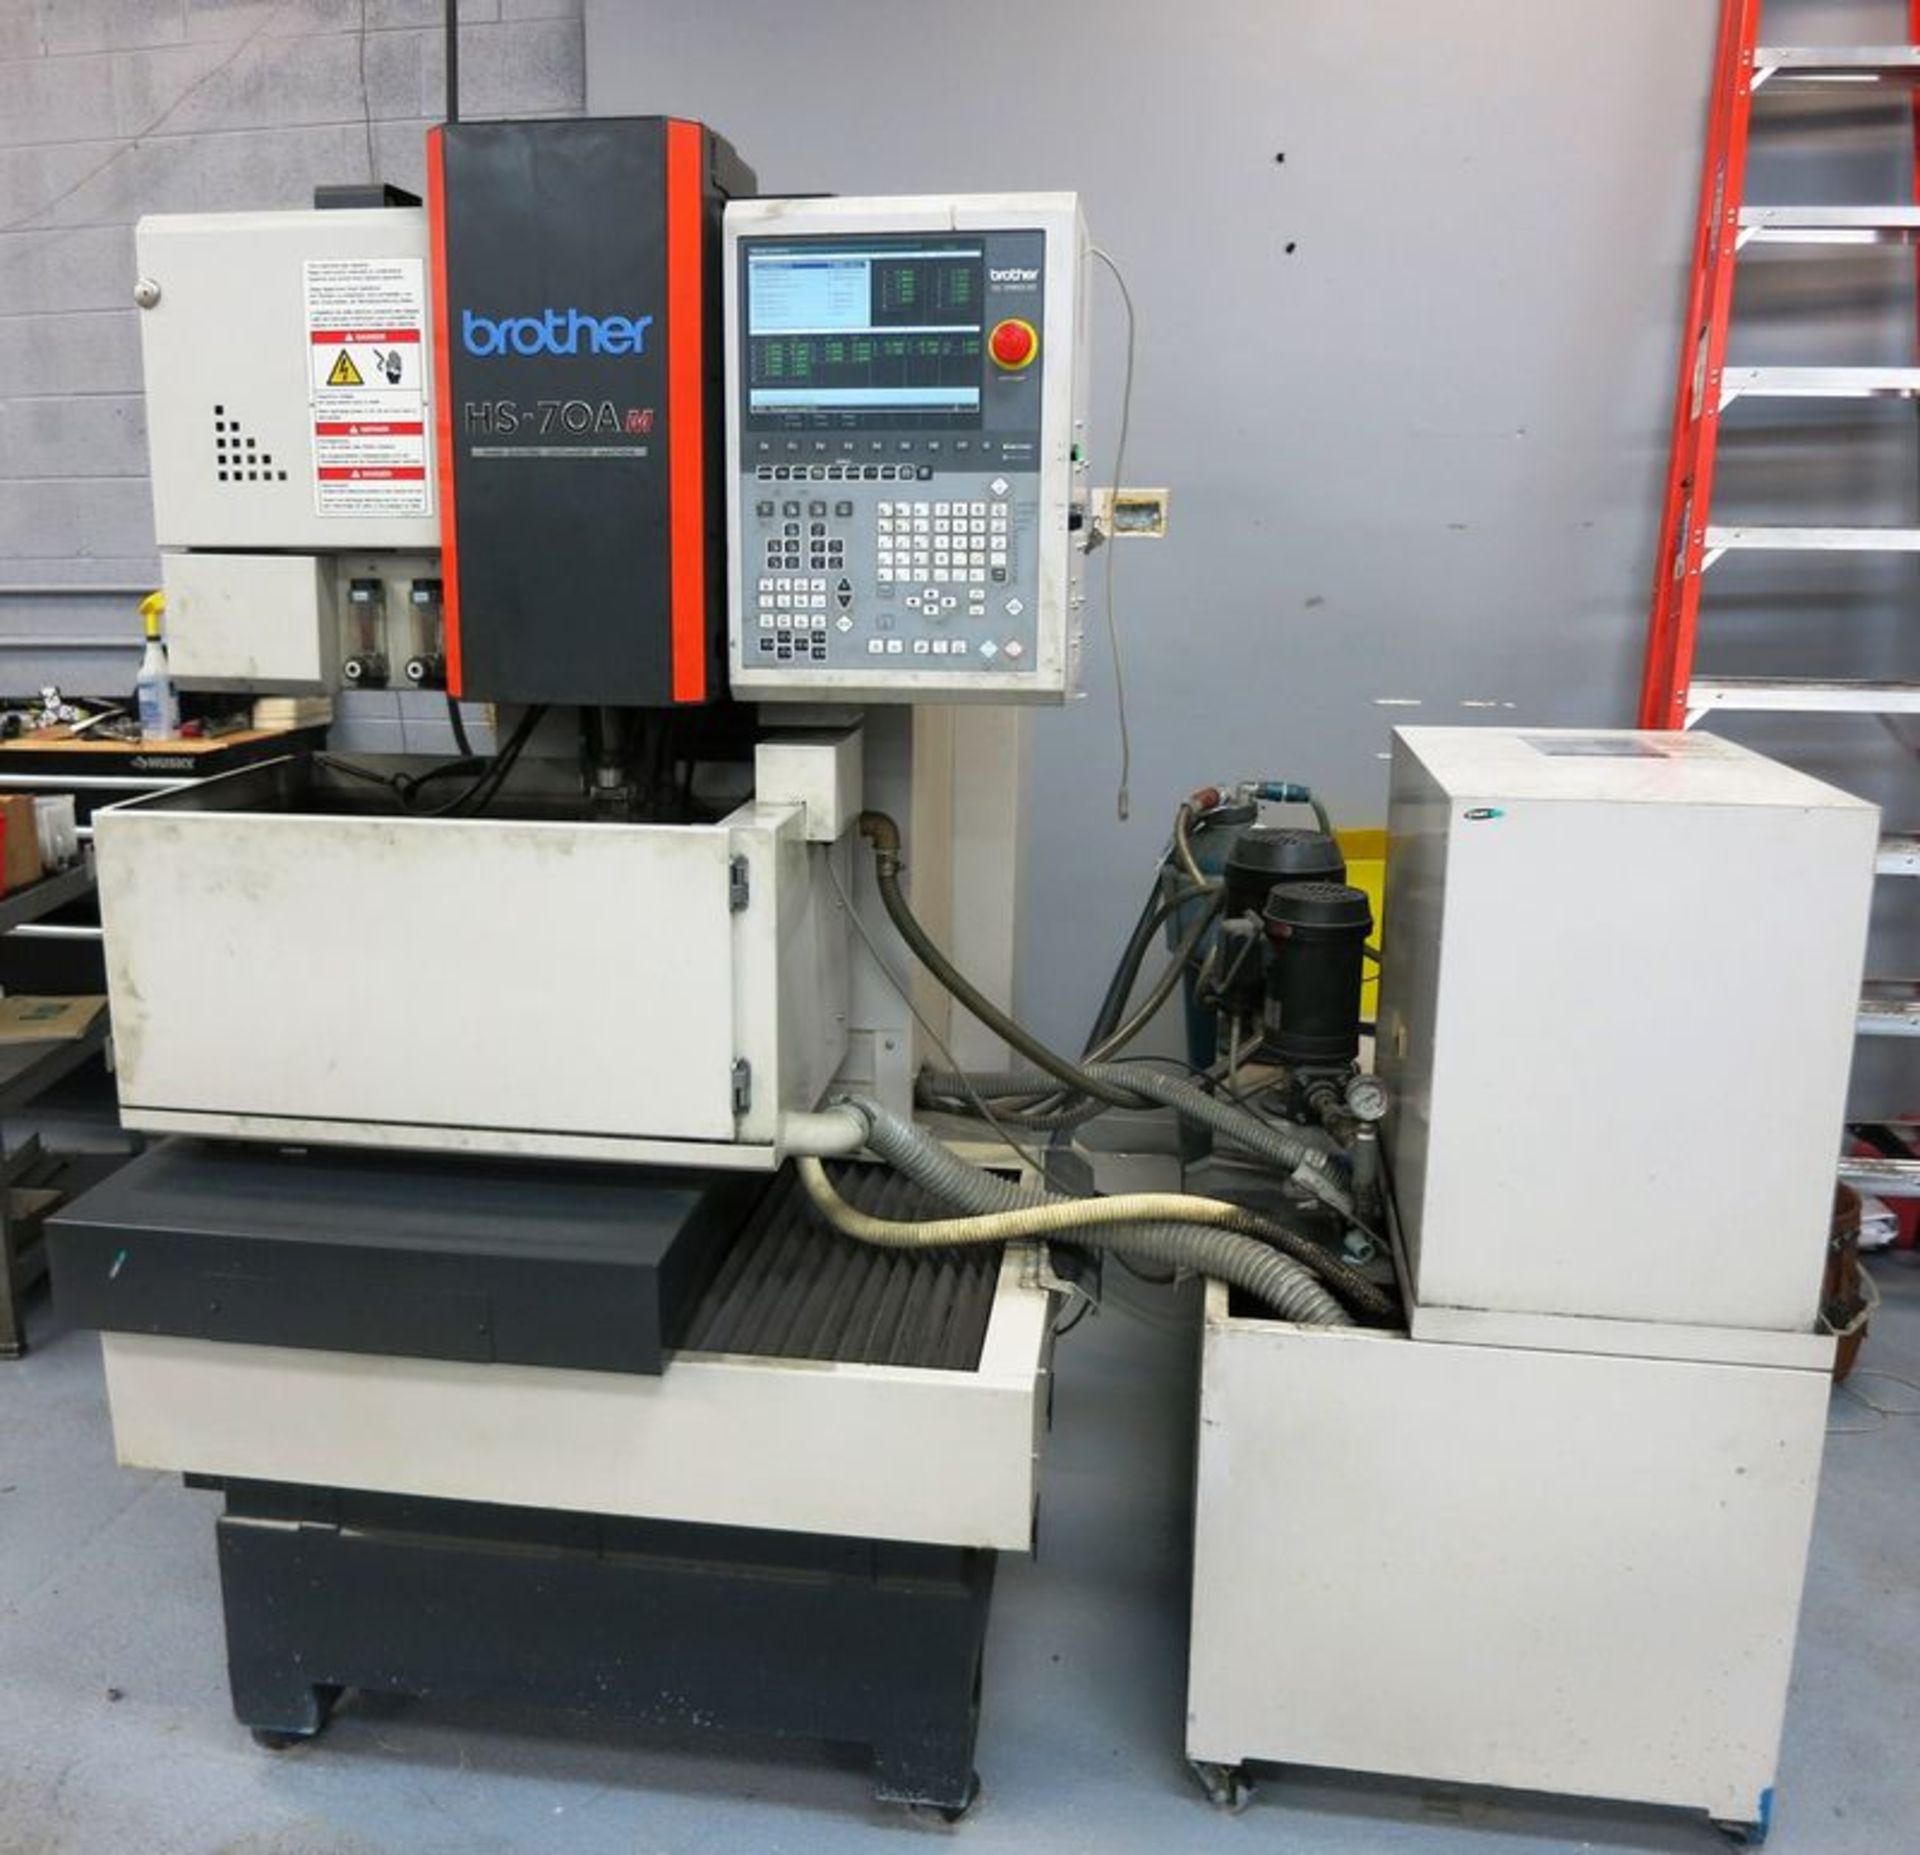 Brother HS-70A CNC 5-Axis Wire EDM, S/N 111455, New 2006